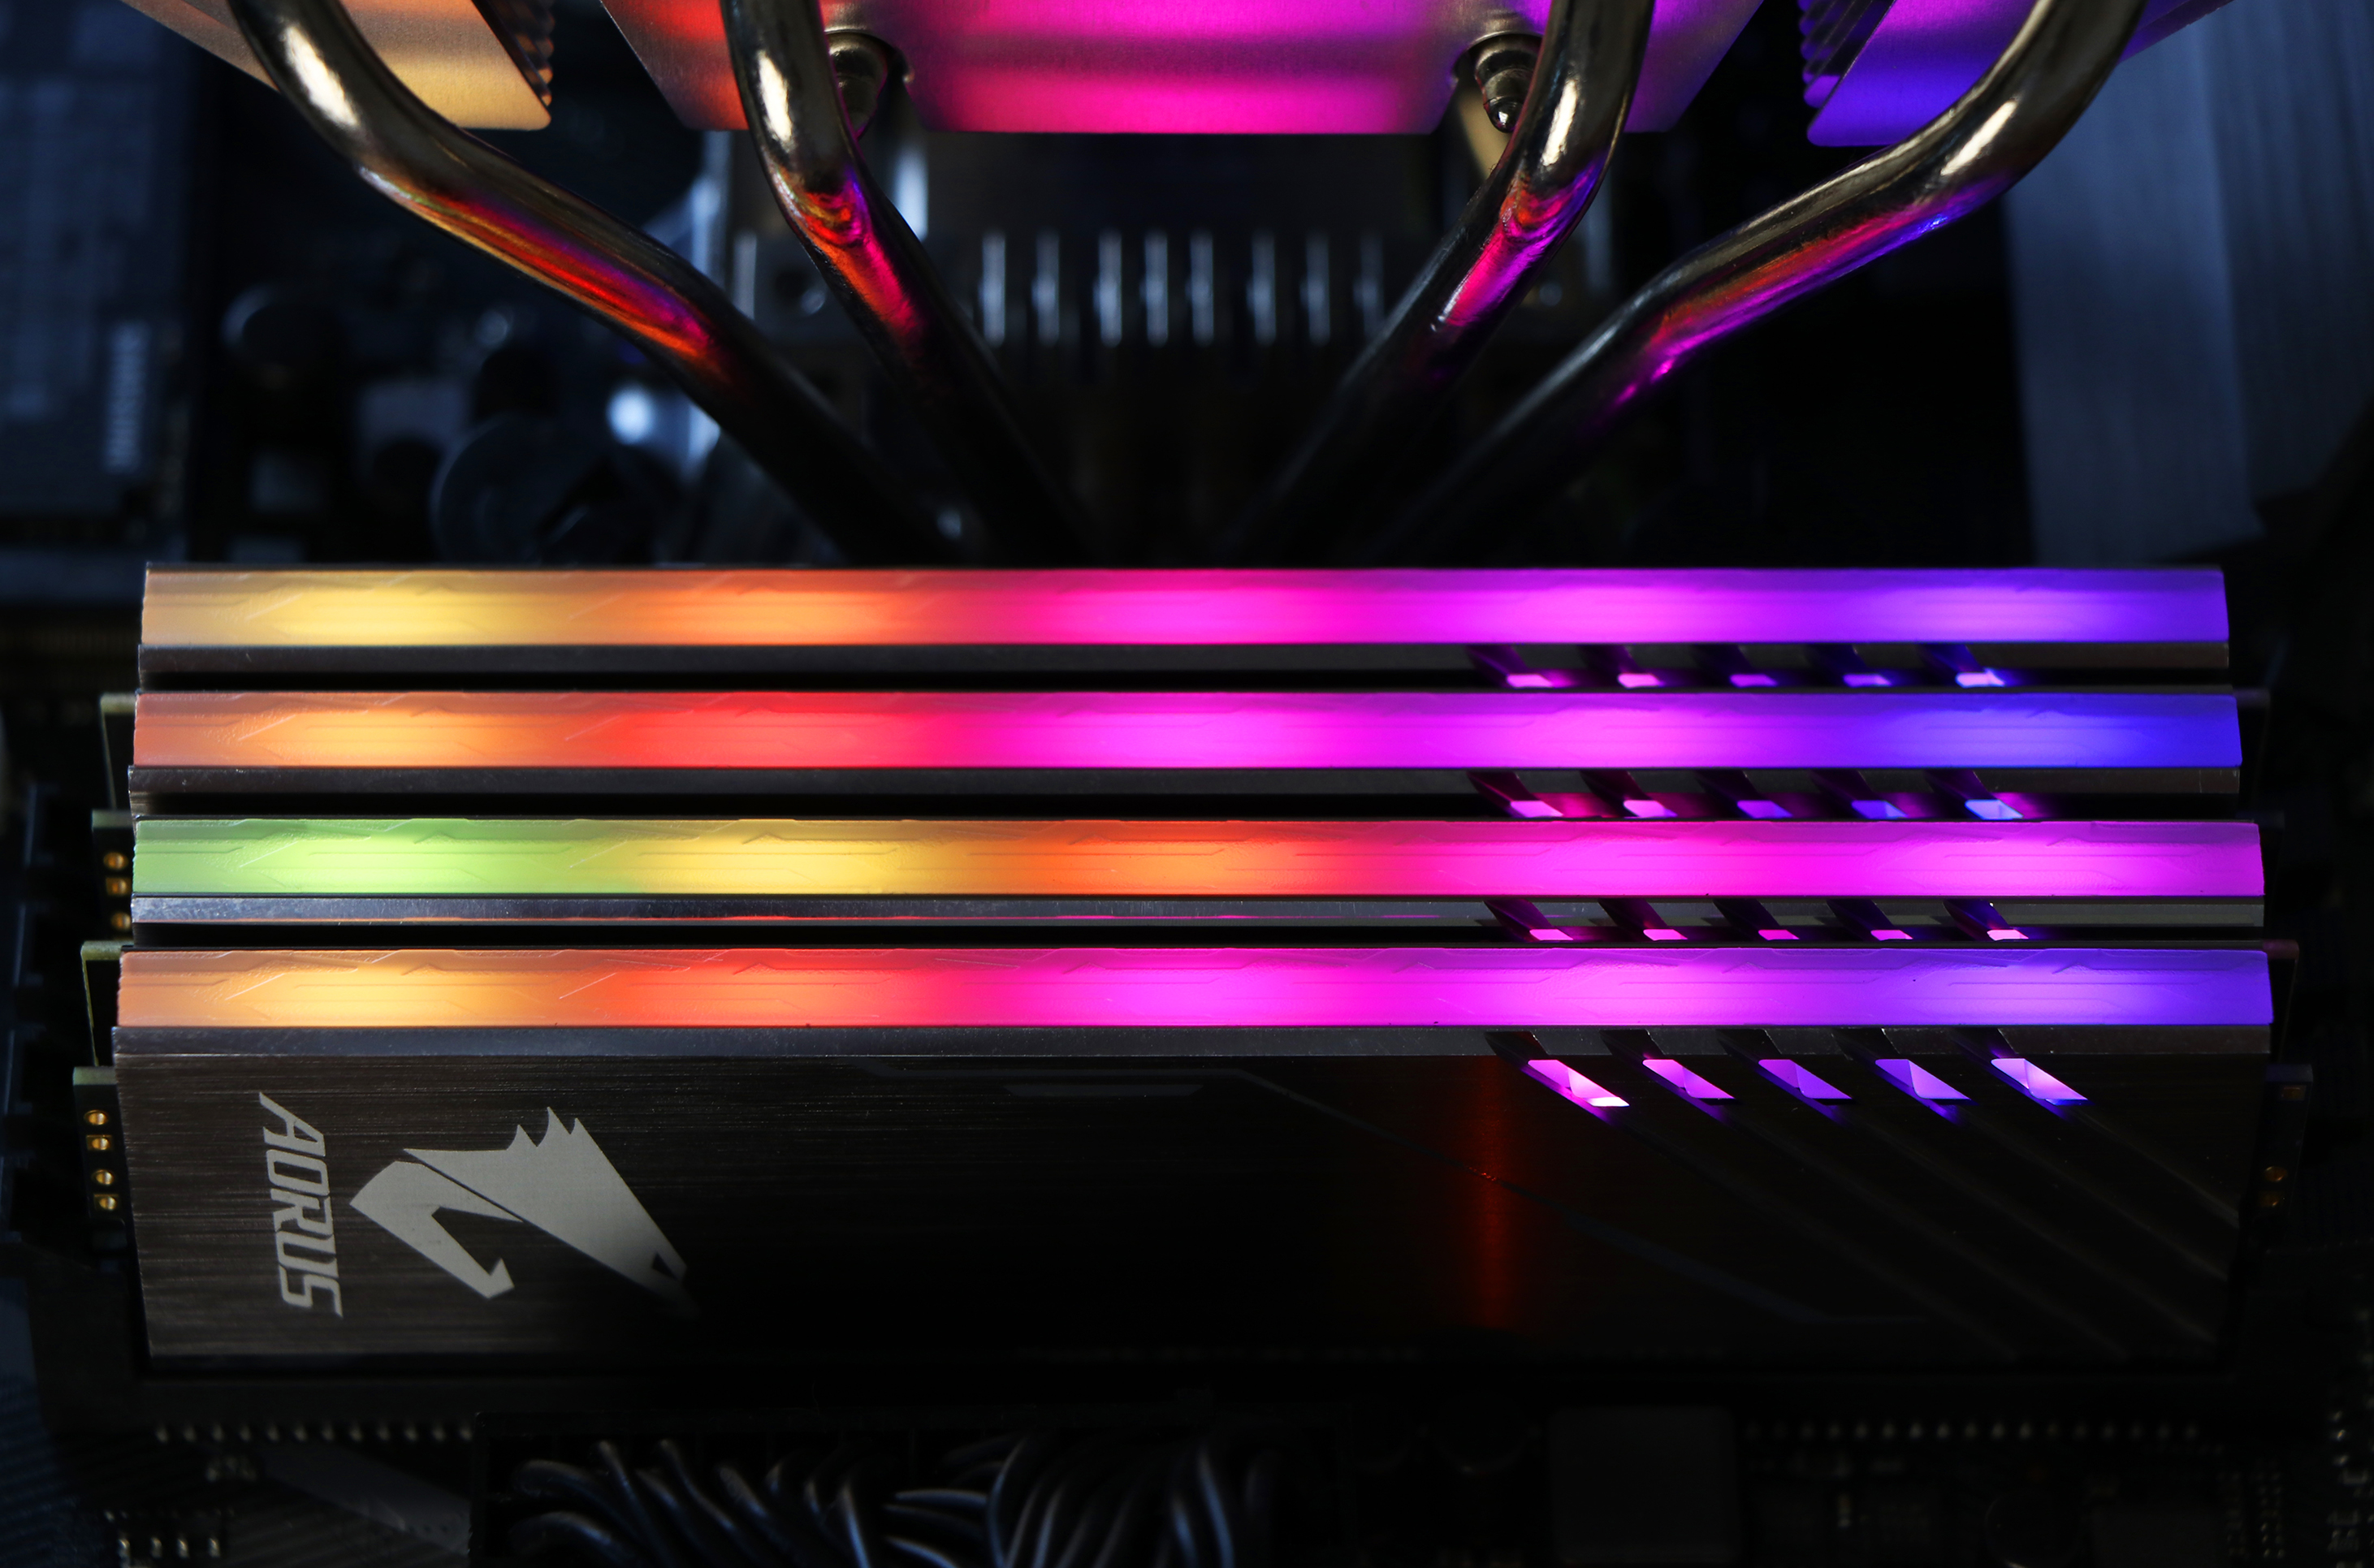 Can the Aorus RGB lighting be controlled from MSI | TechPowerUp